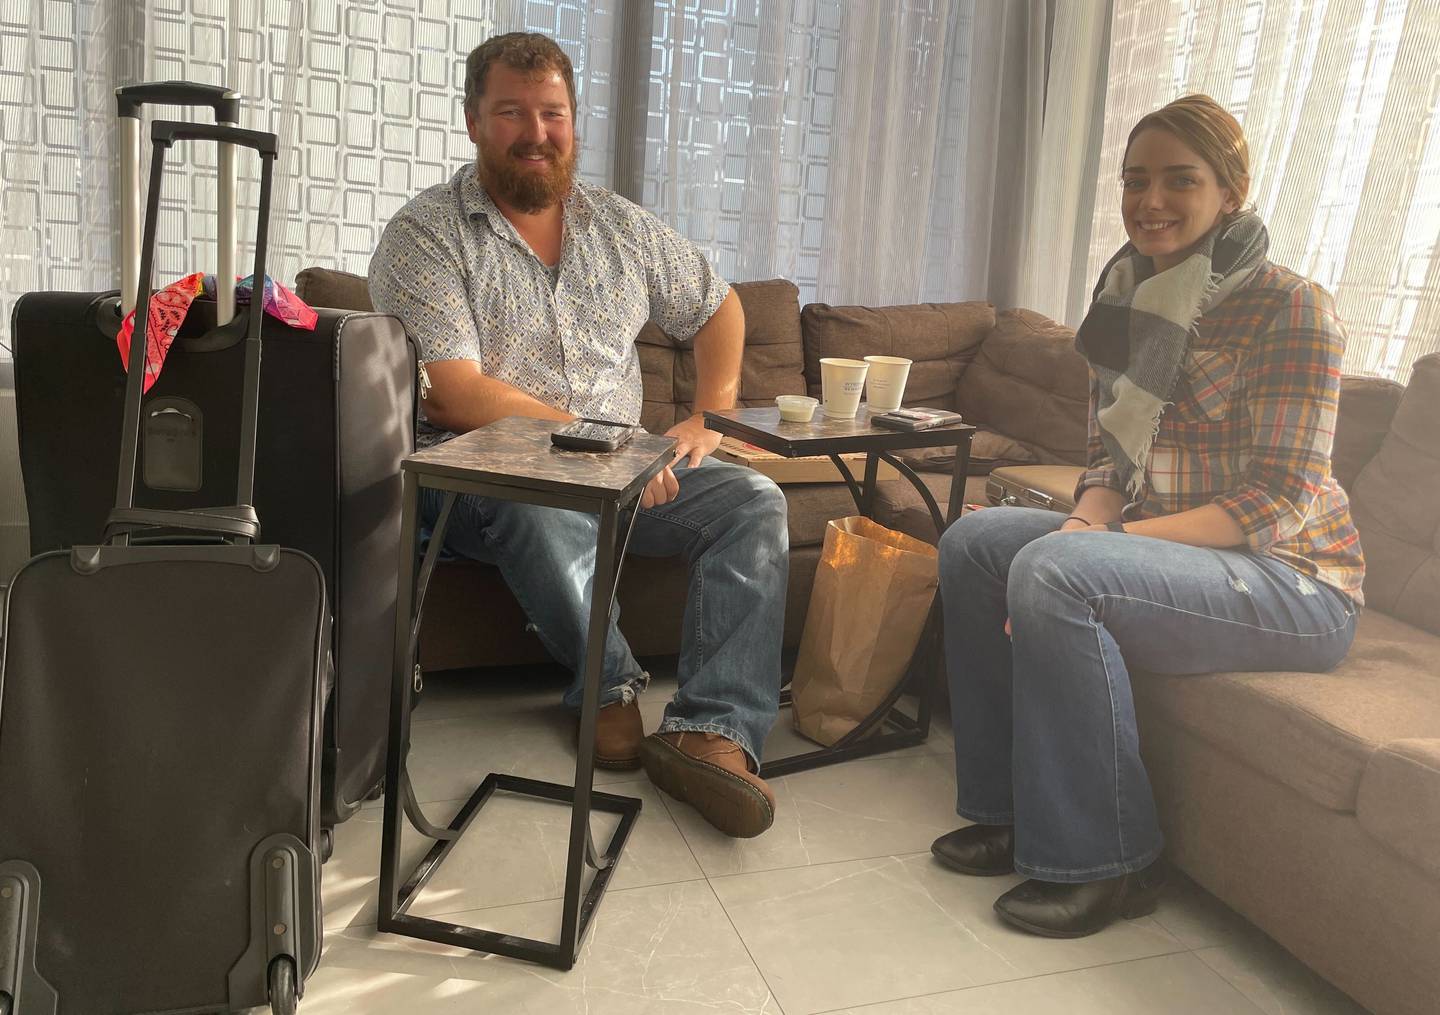 A man and a woman sit on the couch of an airport hotel with their luggage.